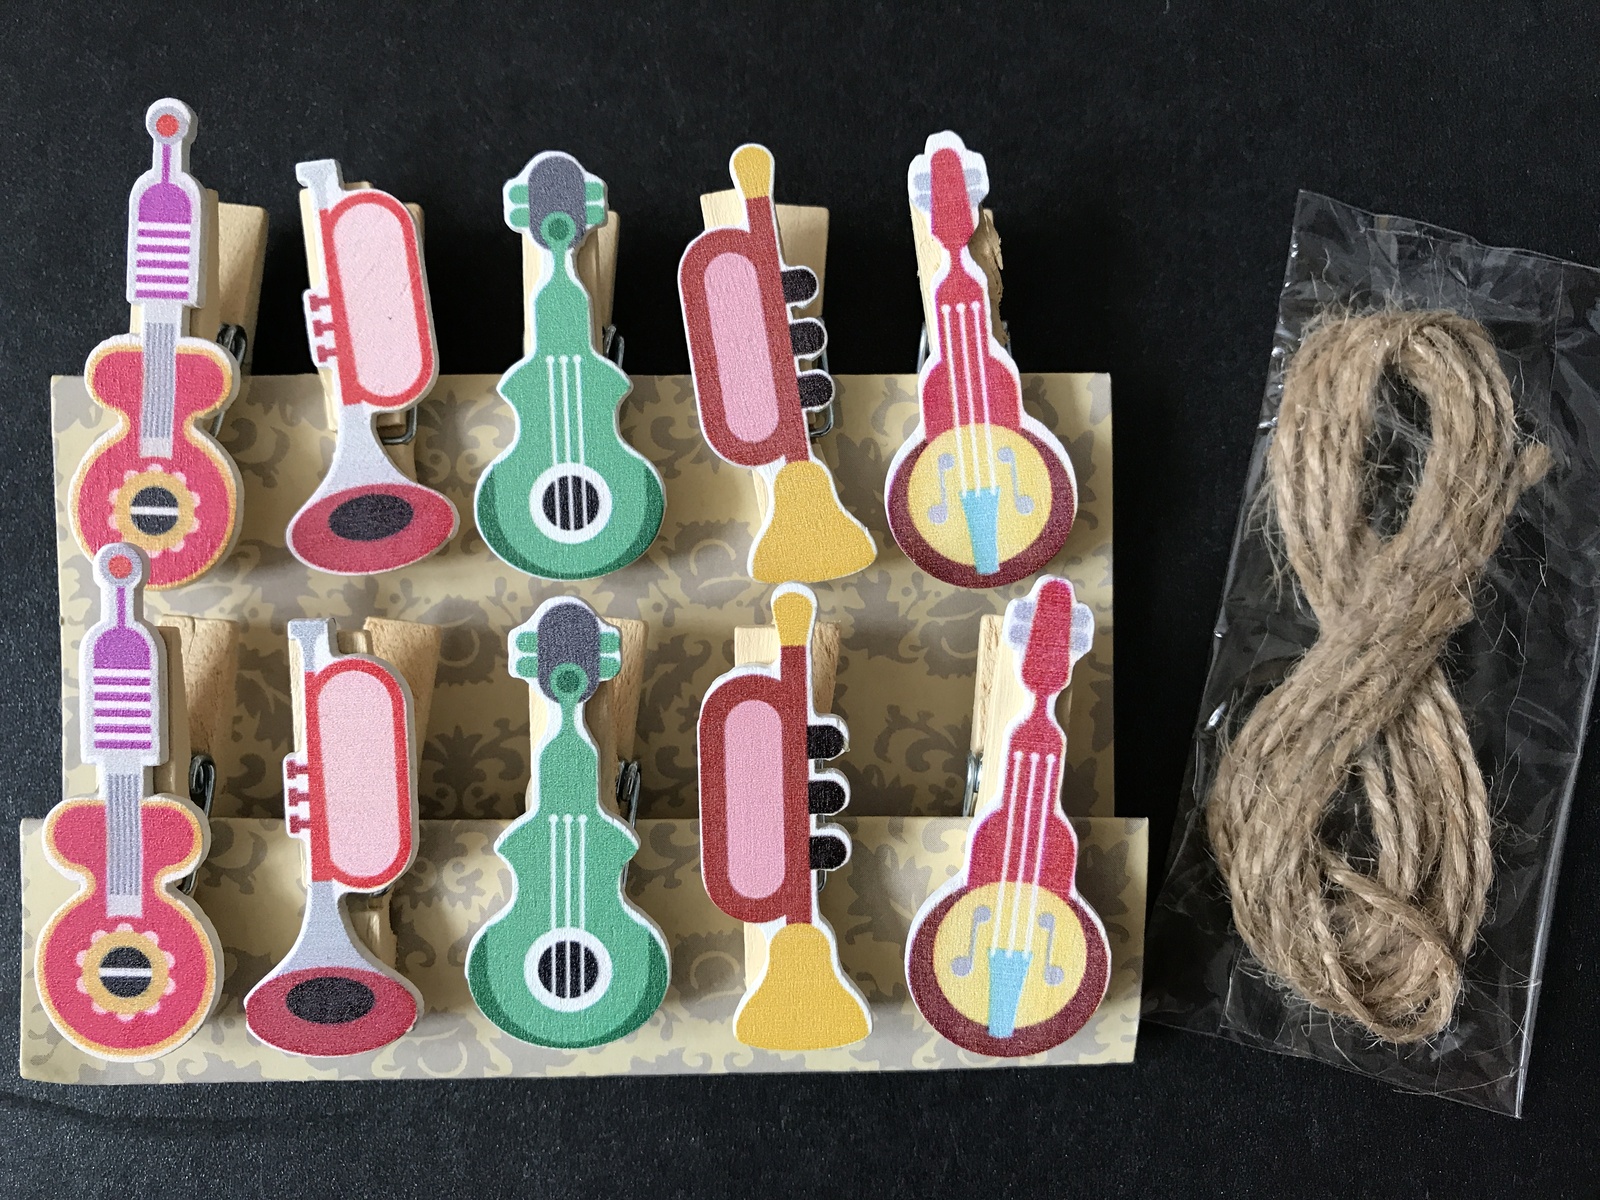 Music Instrument Wood Paper Clips,Wooden Pegs,Pin Clothespins,special gifts